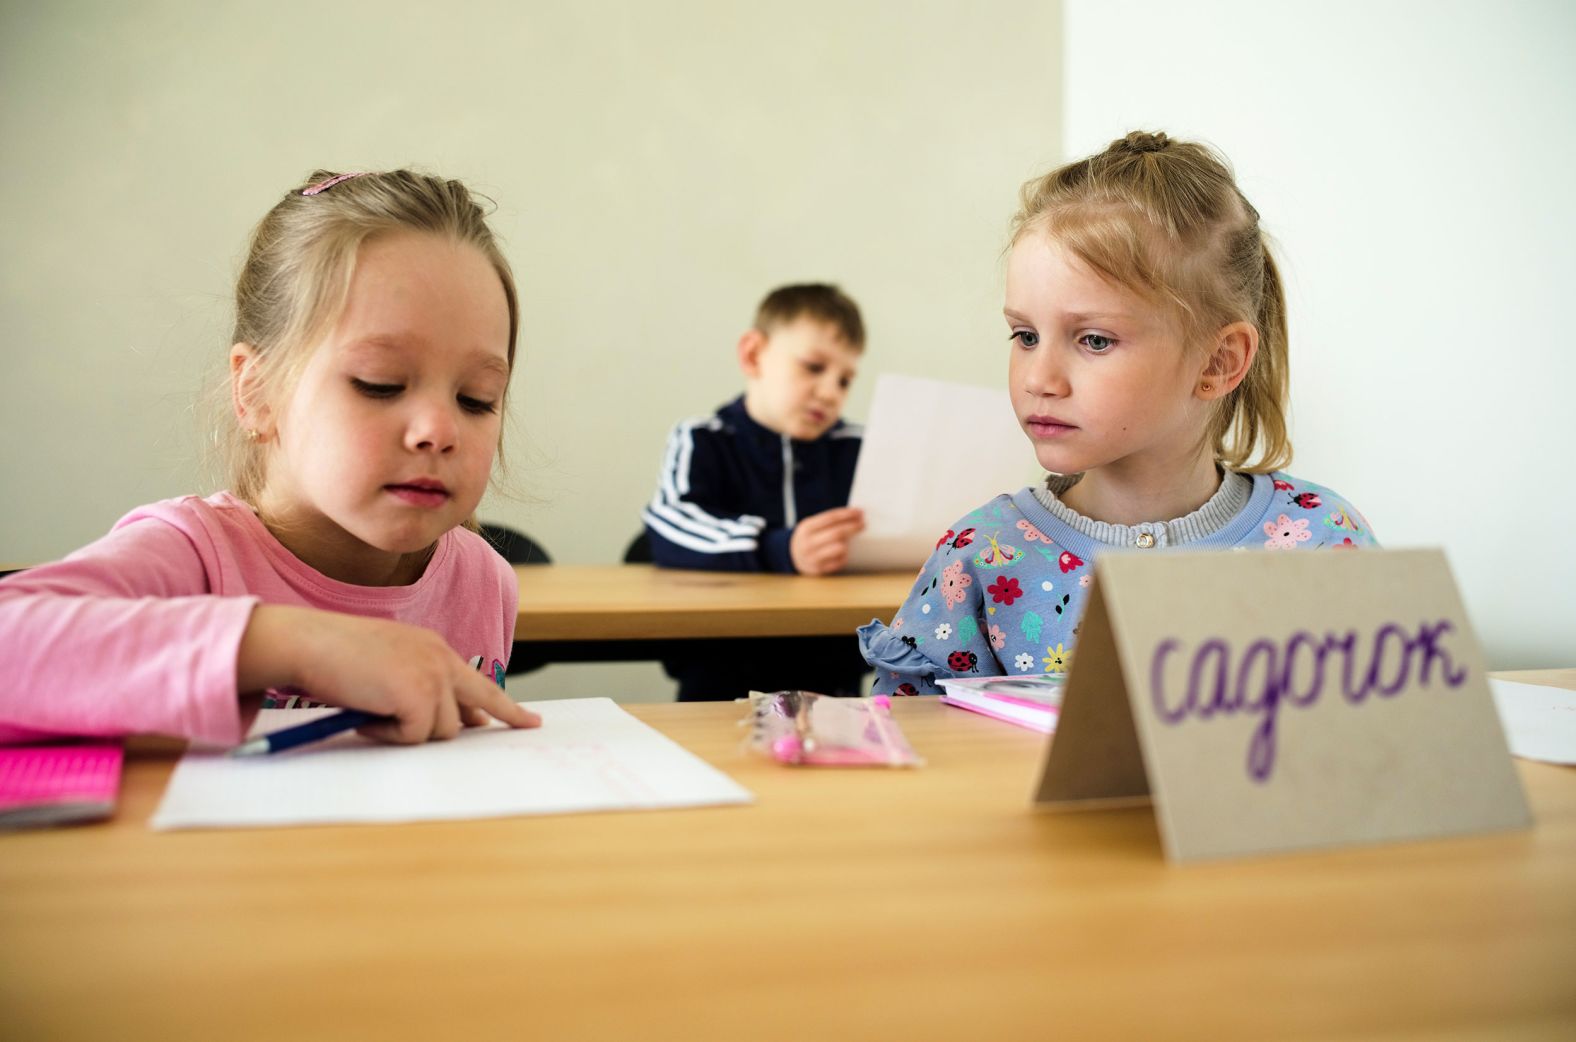 Two children attend a class for Ukrainian refugees in Berlin on March 21. Forty refugee children started their first day of elementary school. The private classes were put together by two Berlin volunteers who managed to raise funds and get free classrooms.